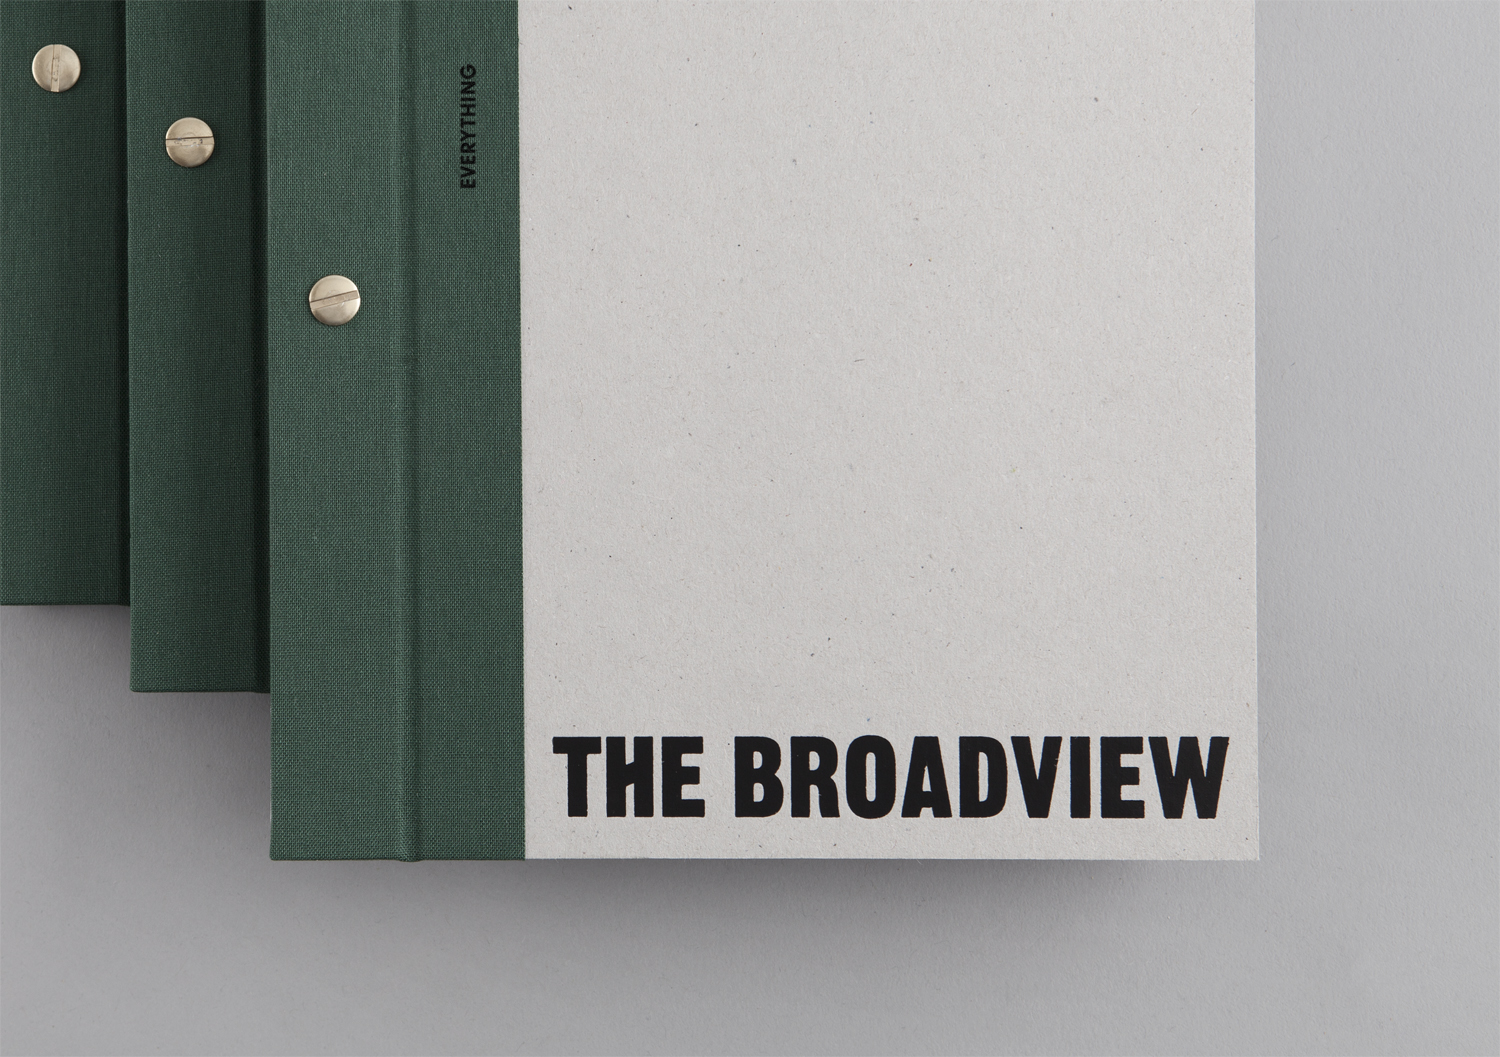 Visual identity and menus designed by Blok for Toronto's The Broadview Hotel